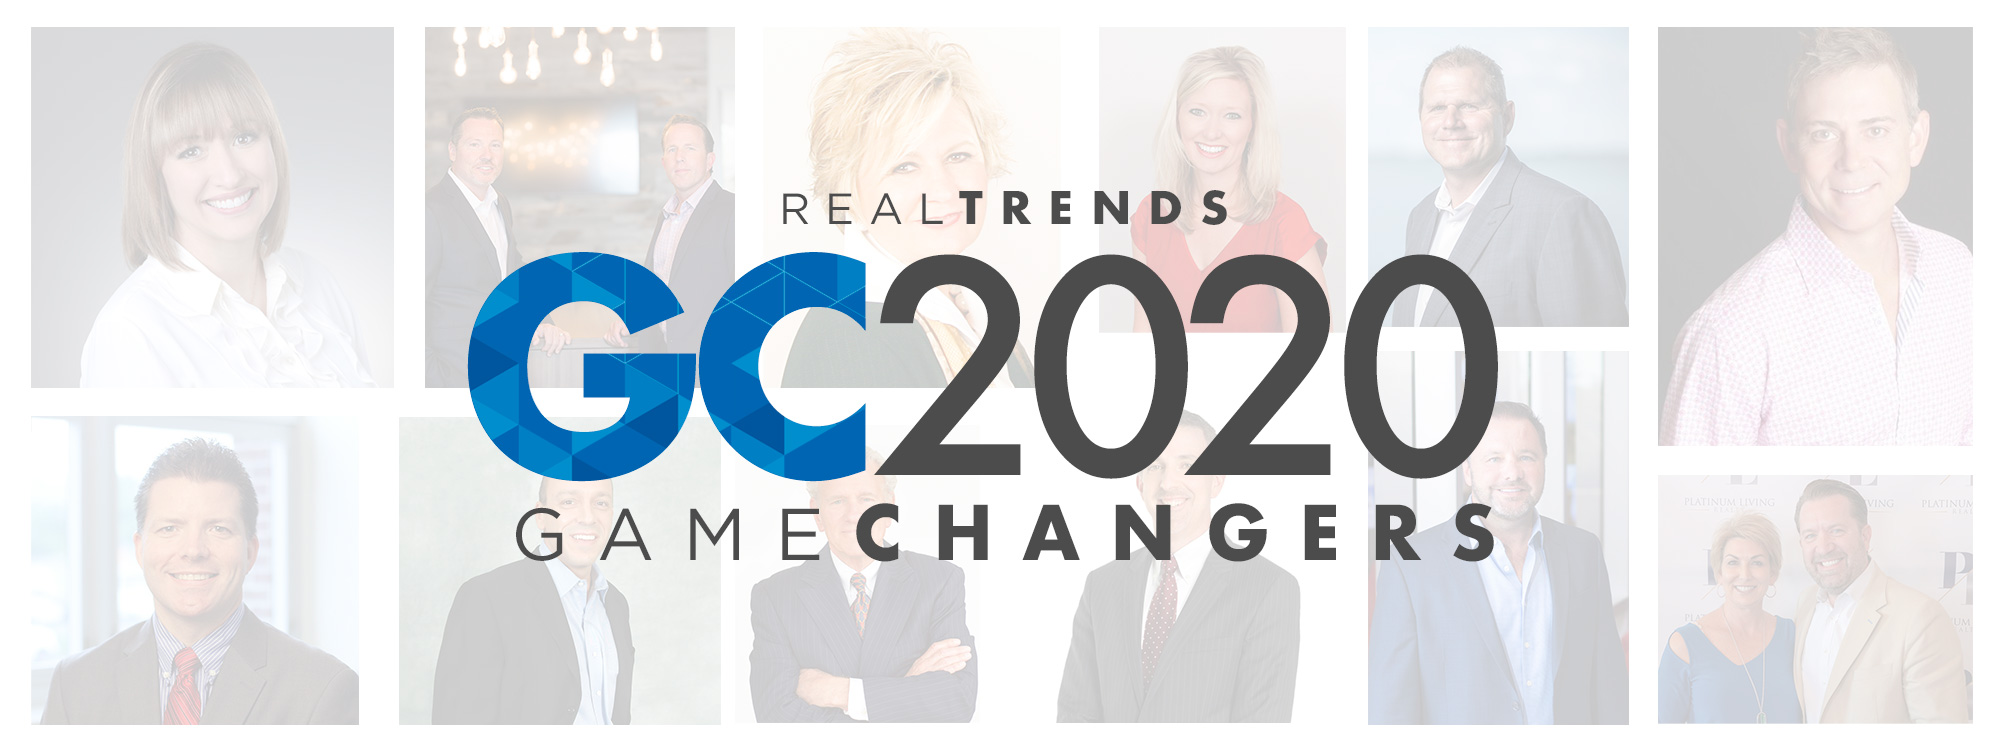 REAL-Trends-Game-Changers-2020-Thumbs-Banner-Logo